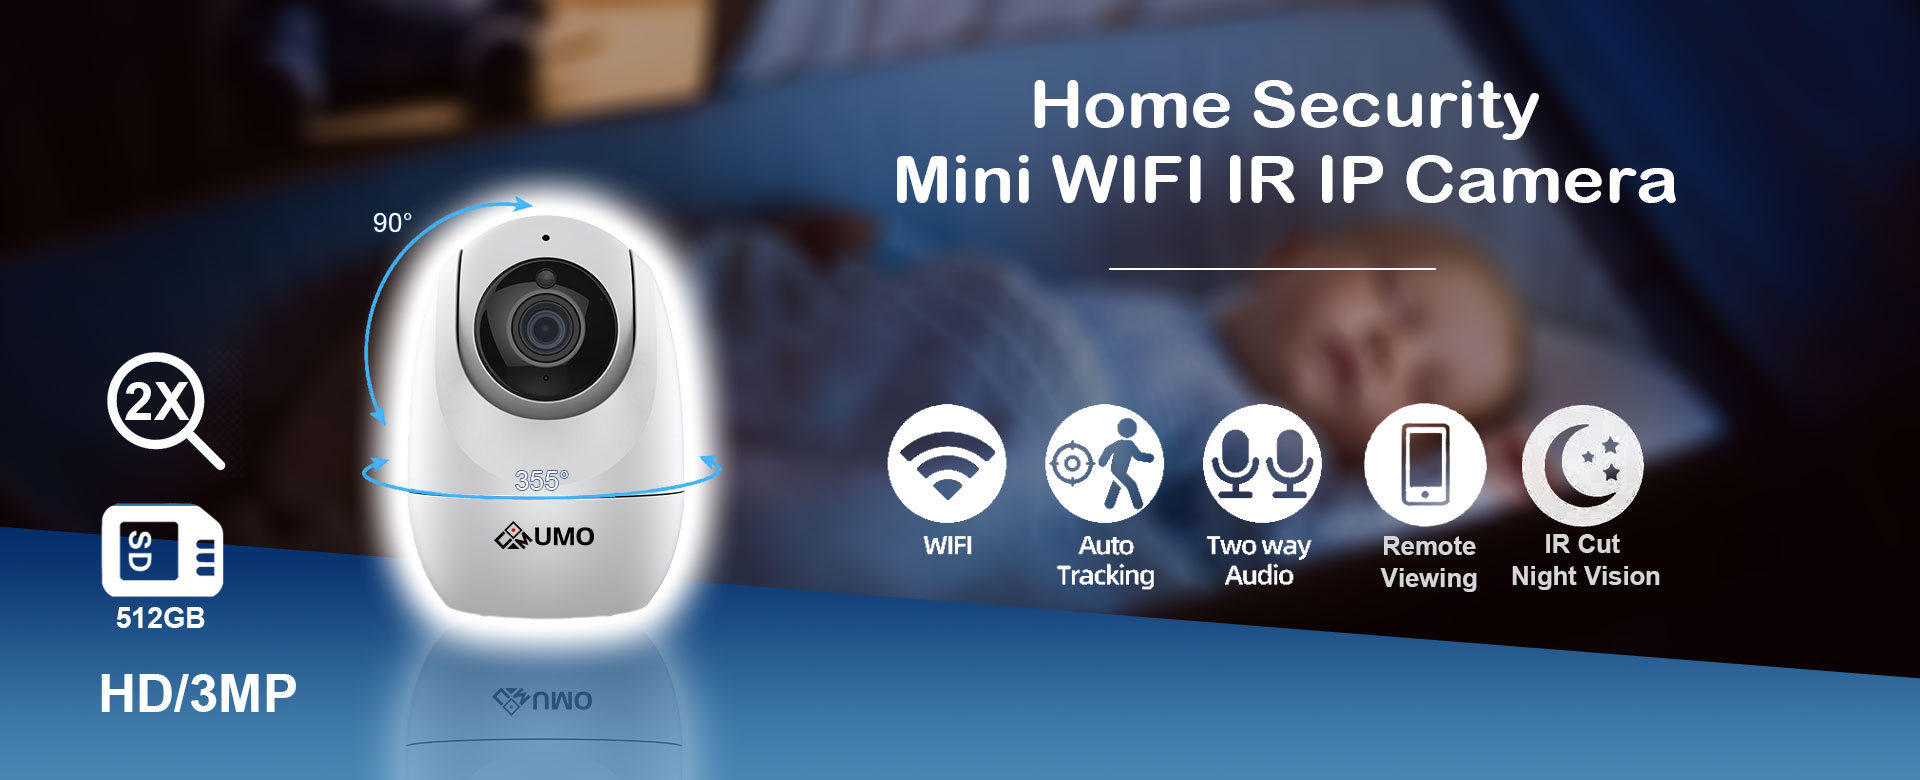 home-security-camera-TC-H332N-banner